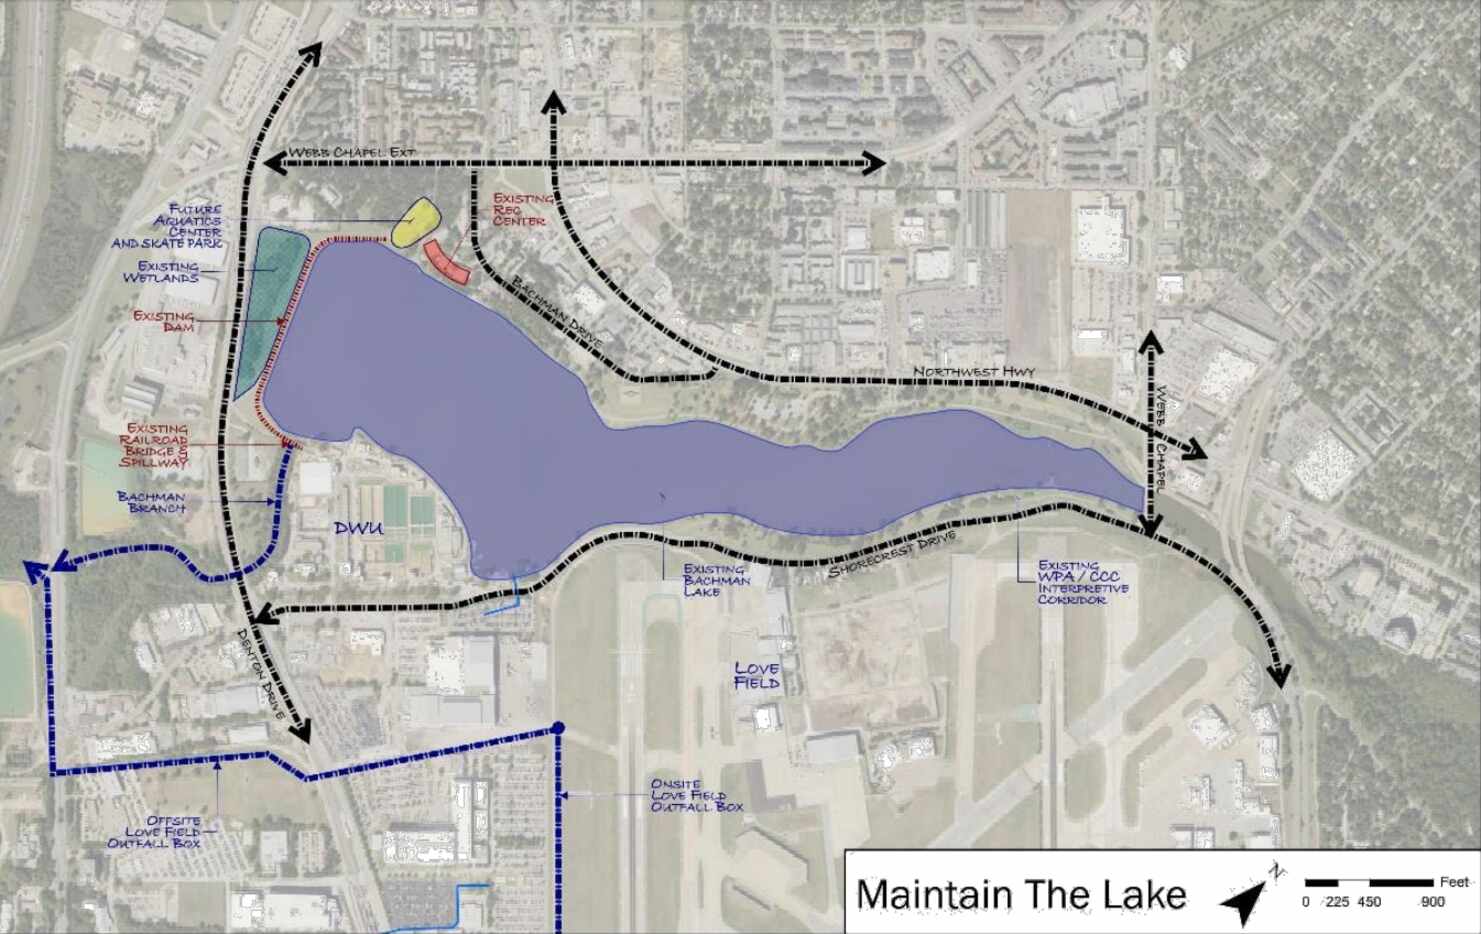 The so-called "Maintain the Lake" option unveiled Monday